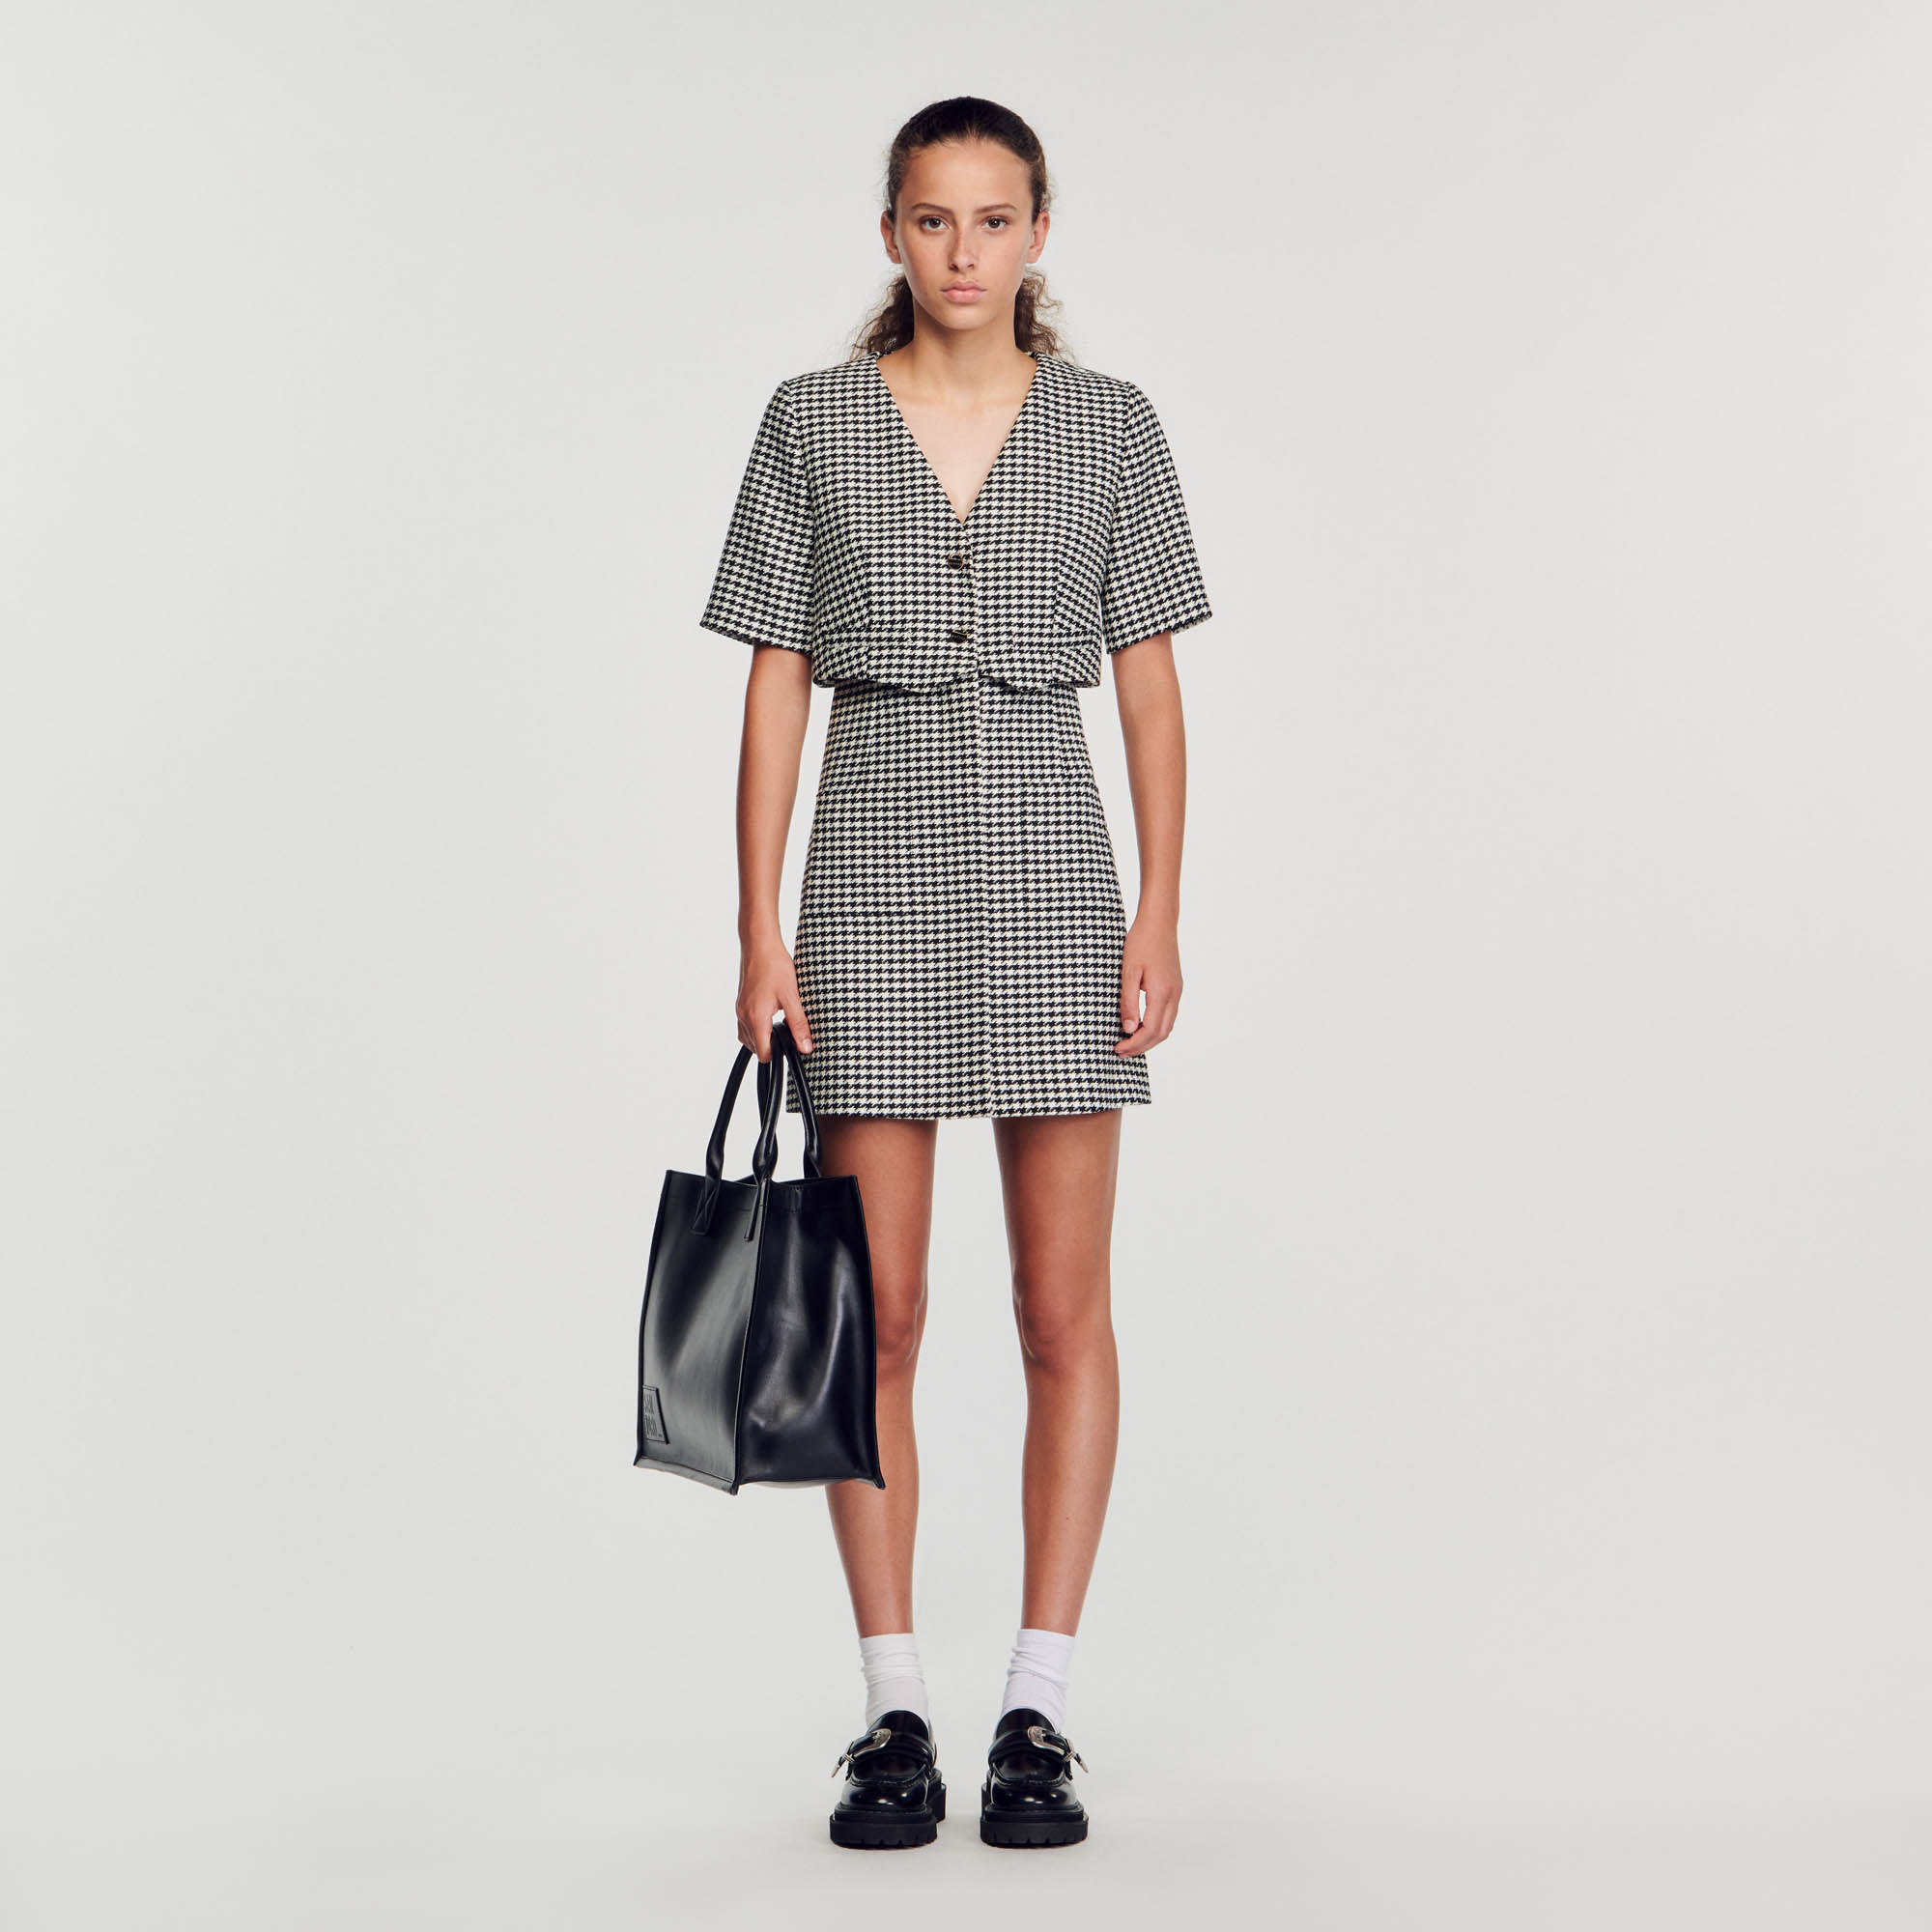 Sandro acrylic Short houndstooth tweed 2-in-1 dress featuring a layered top with a crossover V-shaped neckline and buttons, short sleeves, and a straight-cut skirt